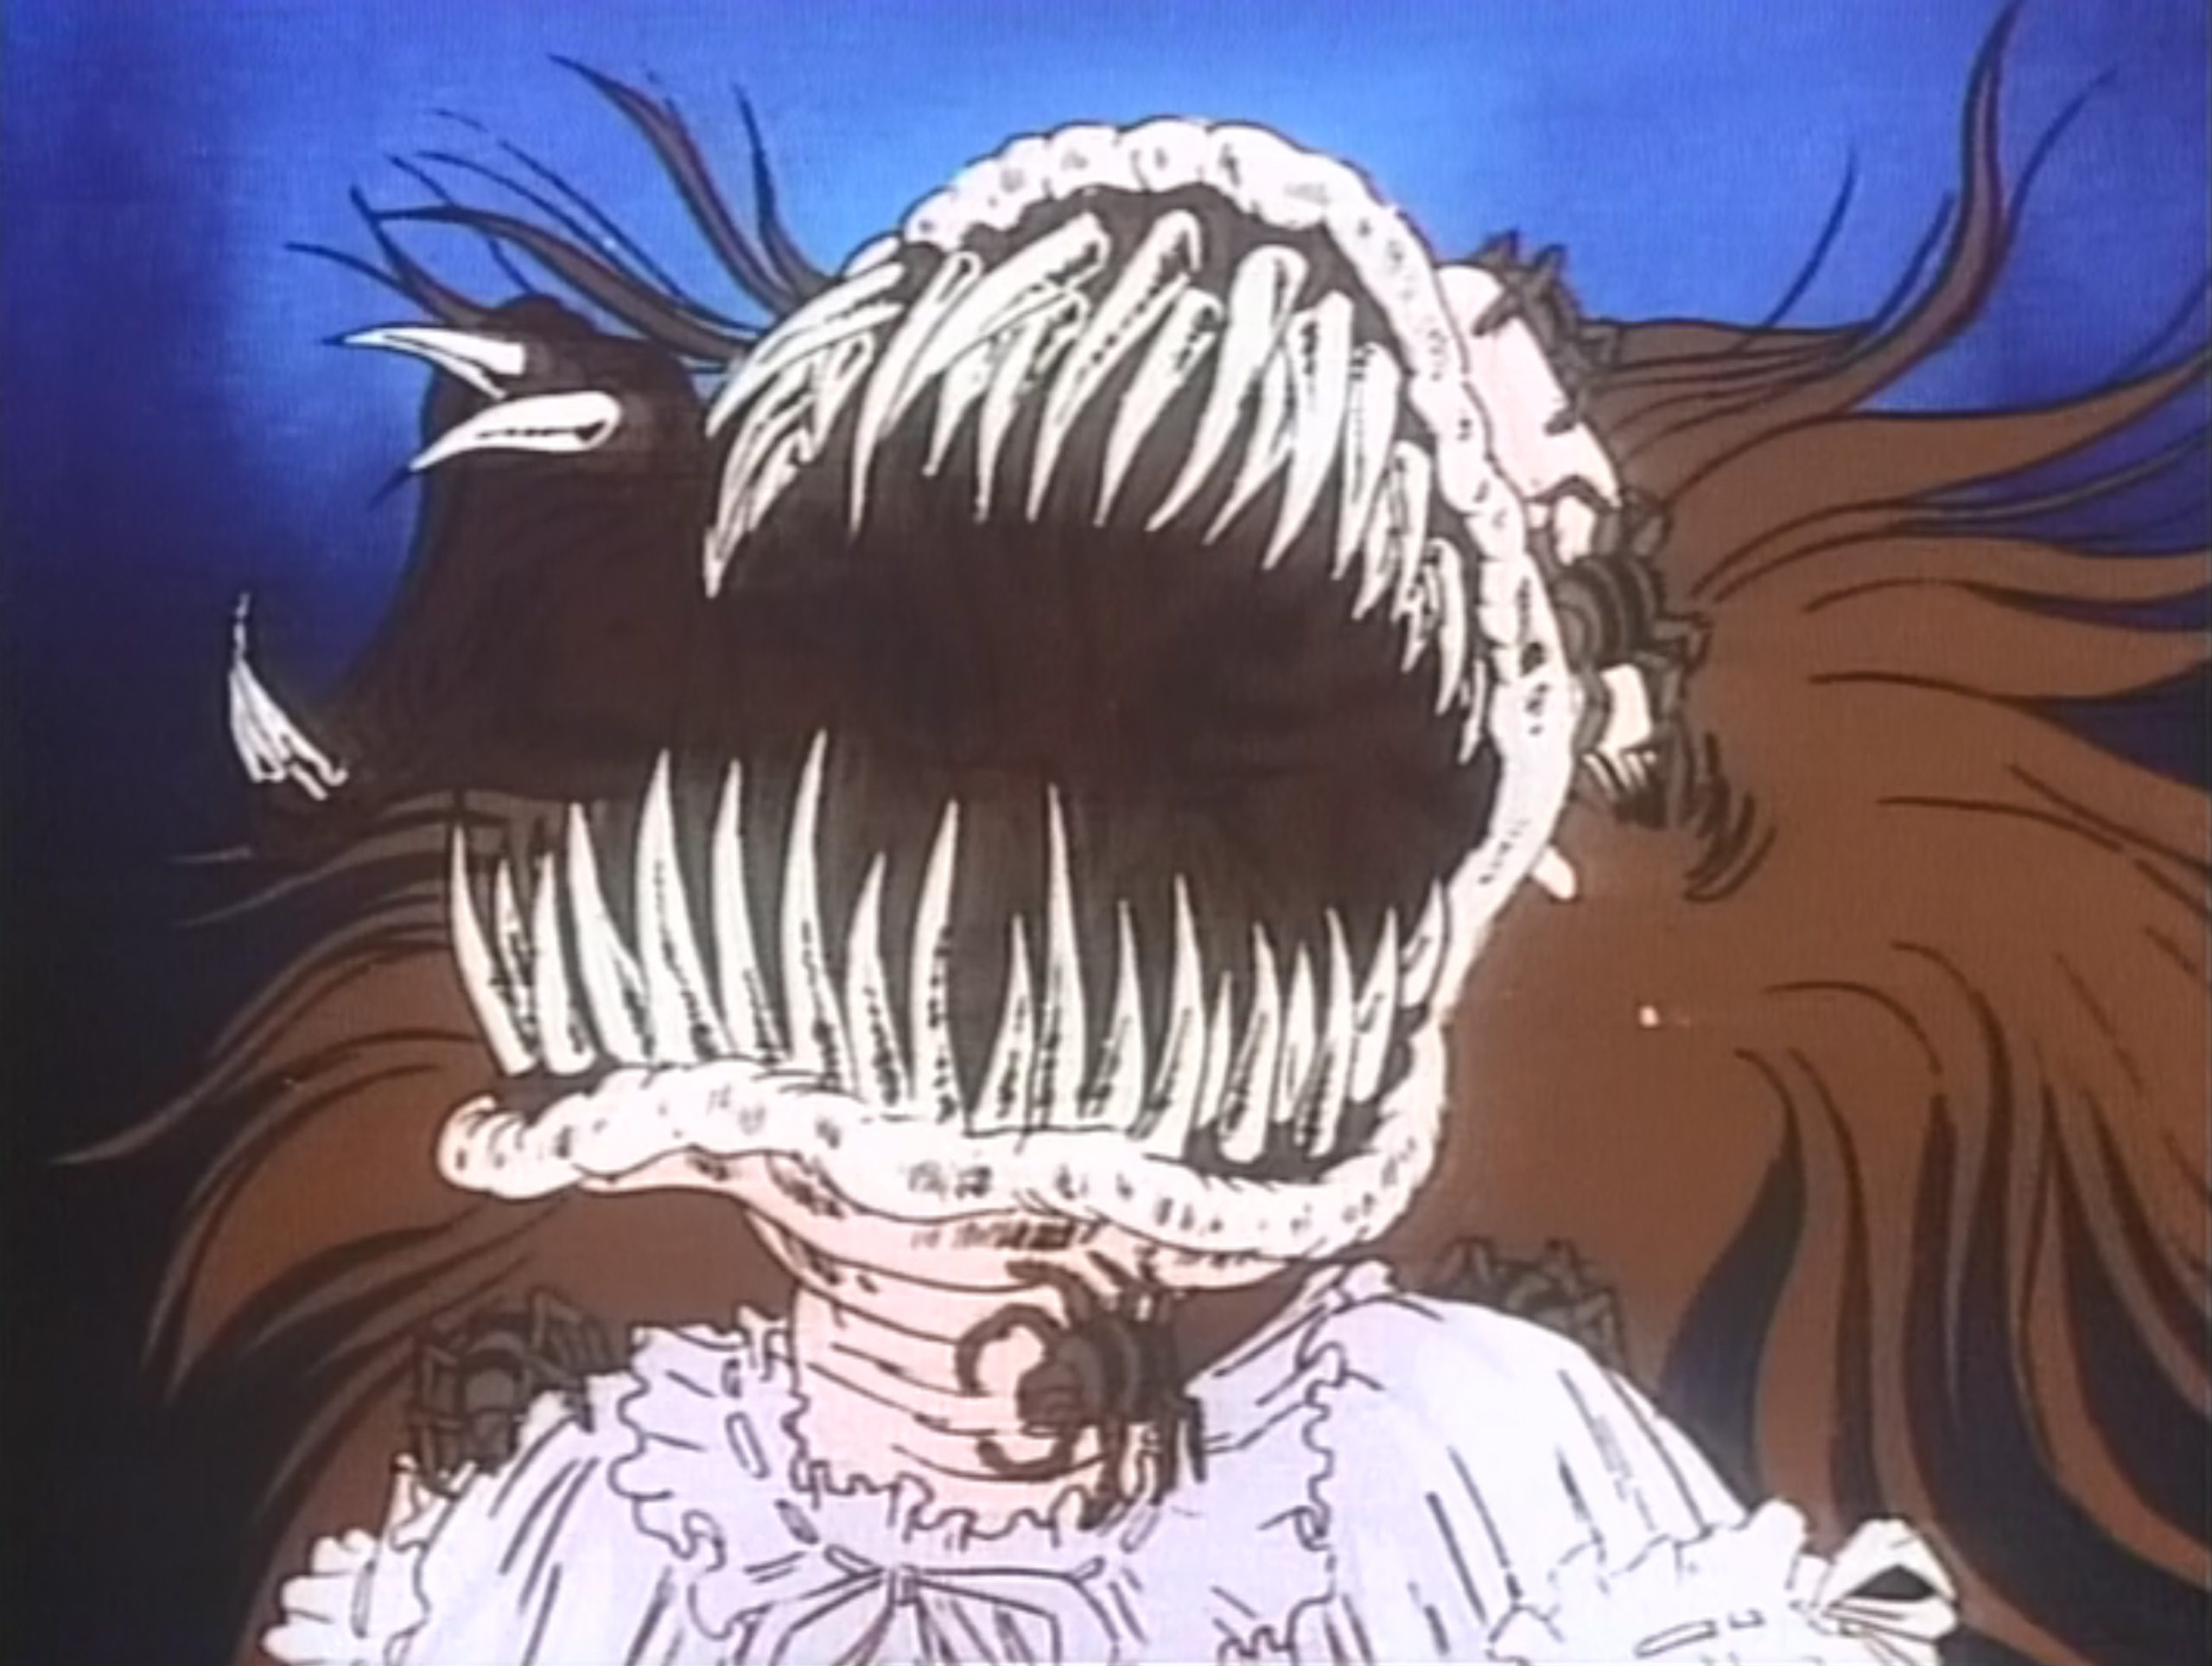 The intro to Junji Ito's Netflix anime is a trippy, creepy first